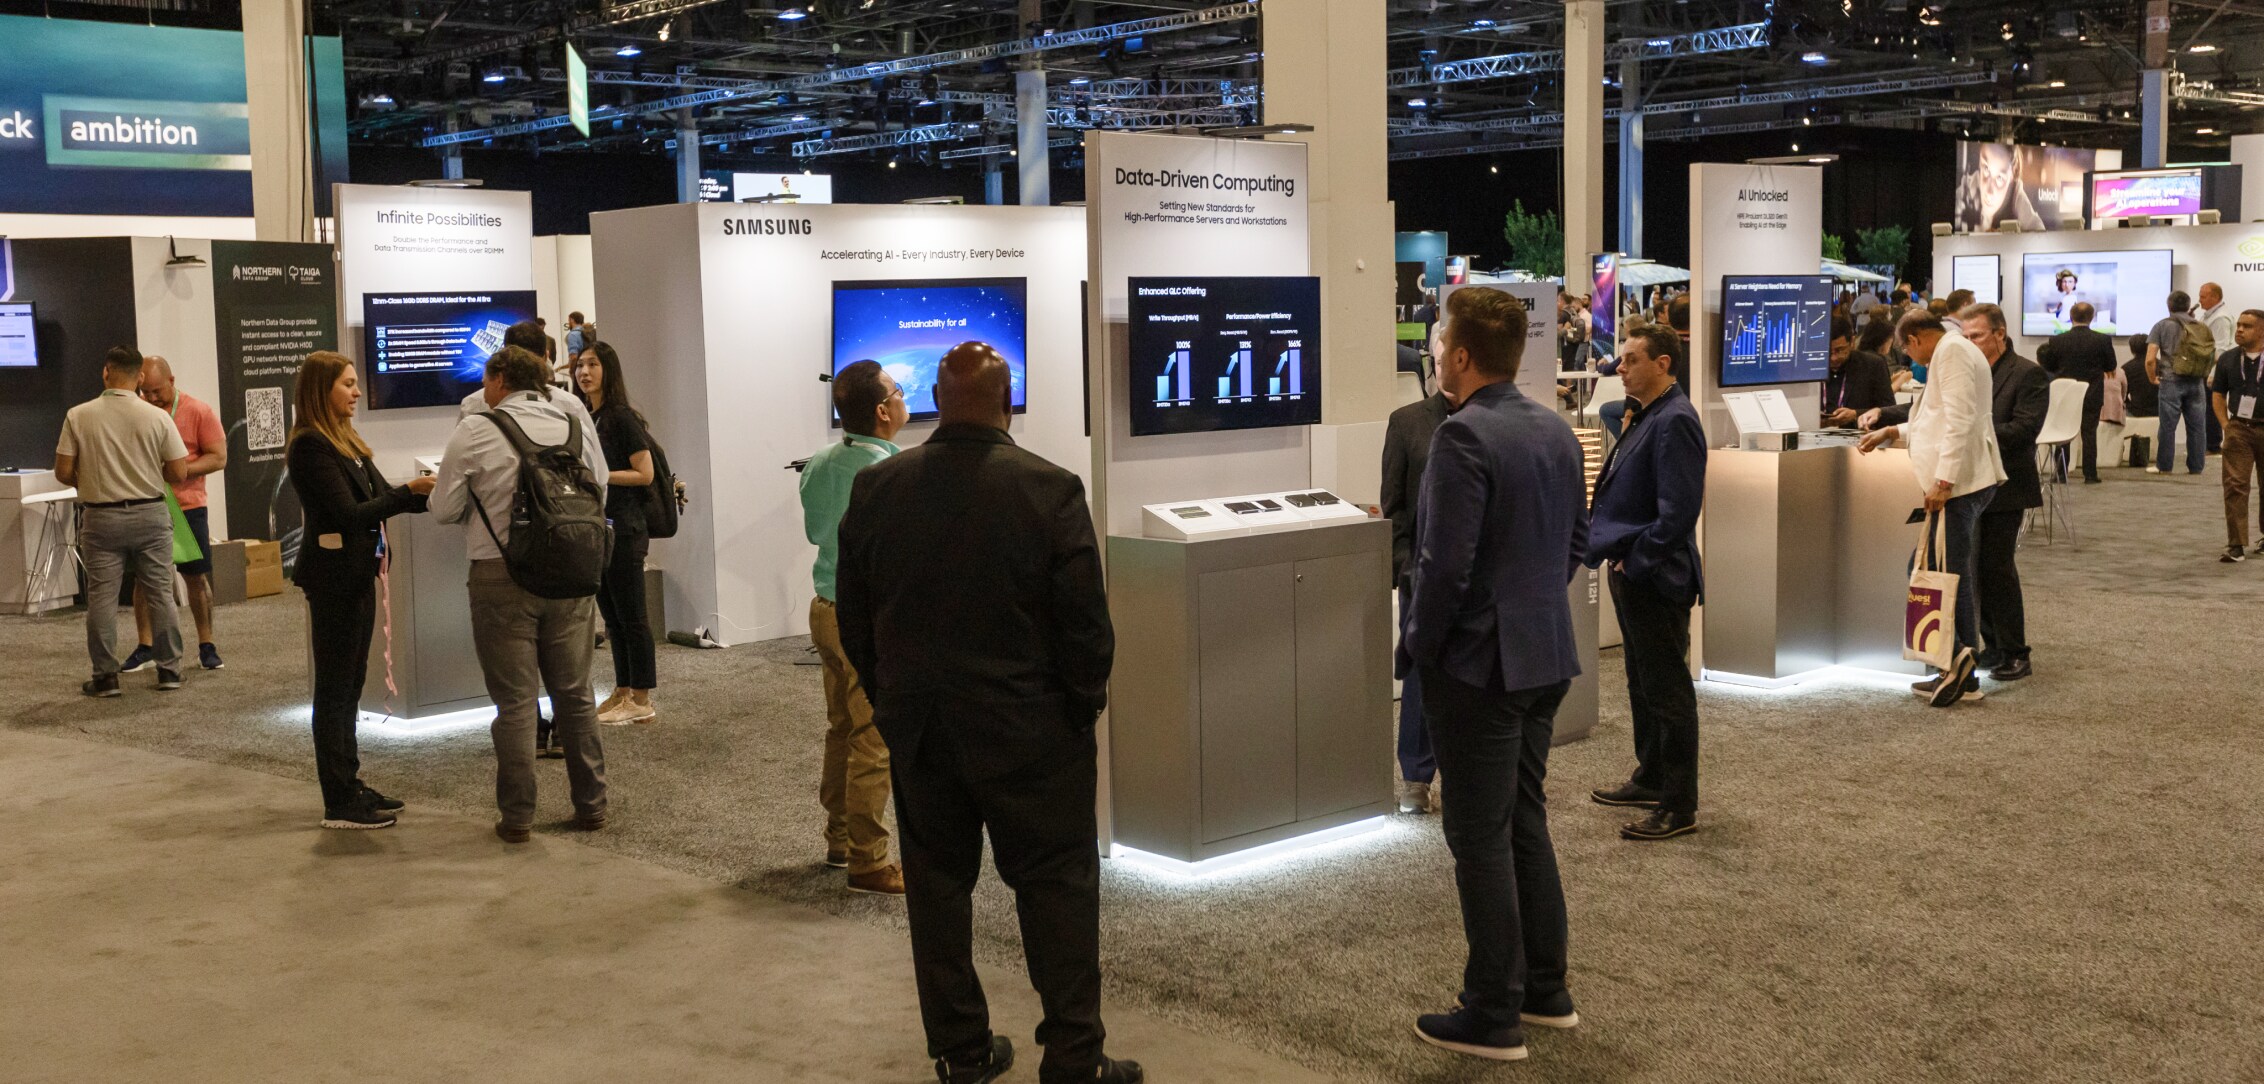 Attendees exploring various Samsung exhibits at HPE Discover 2024, including Data-Driven Computing, AI Unlocked, and other technological advancements.